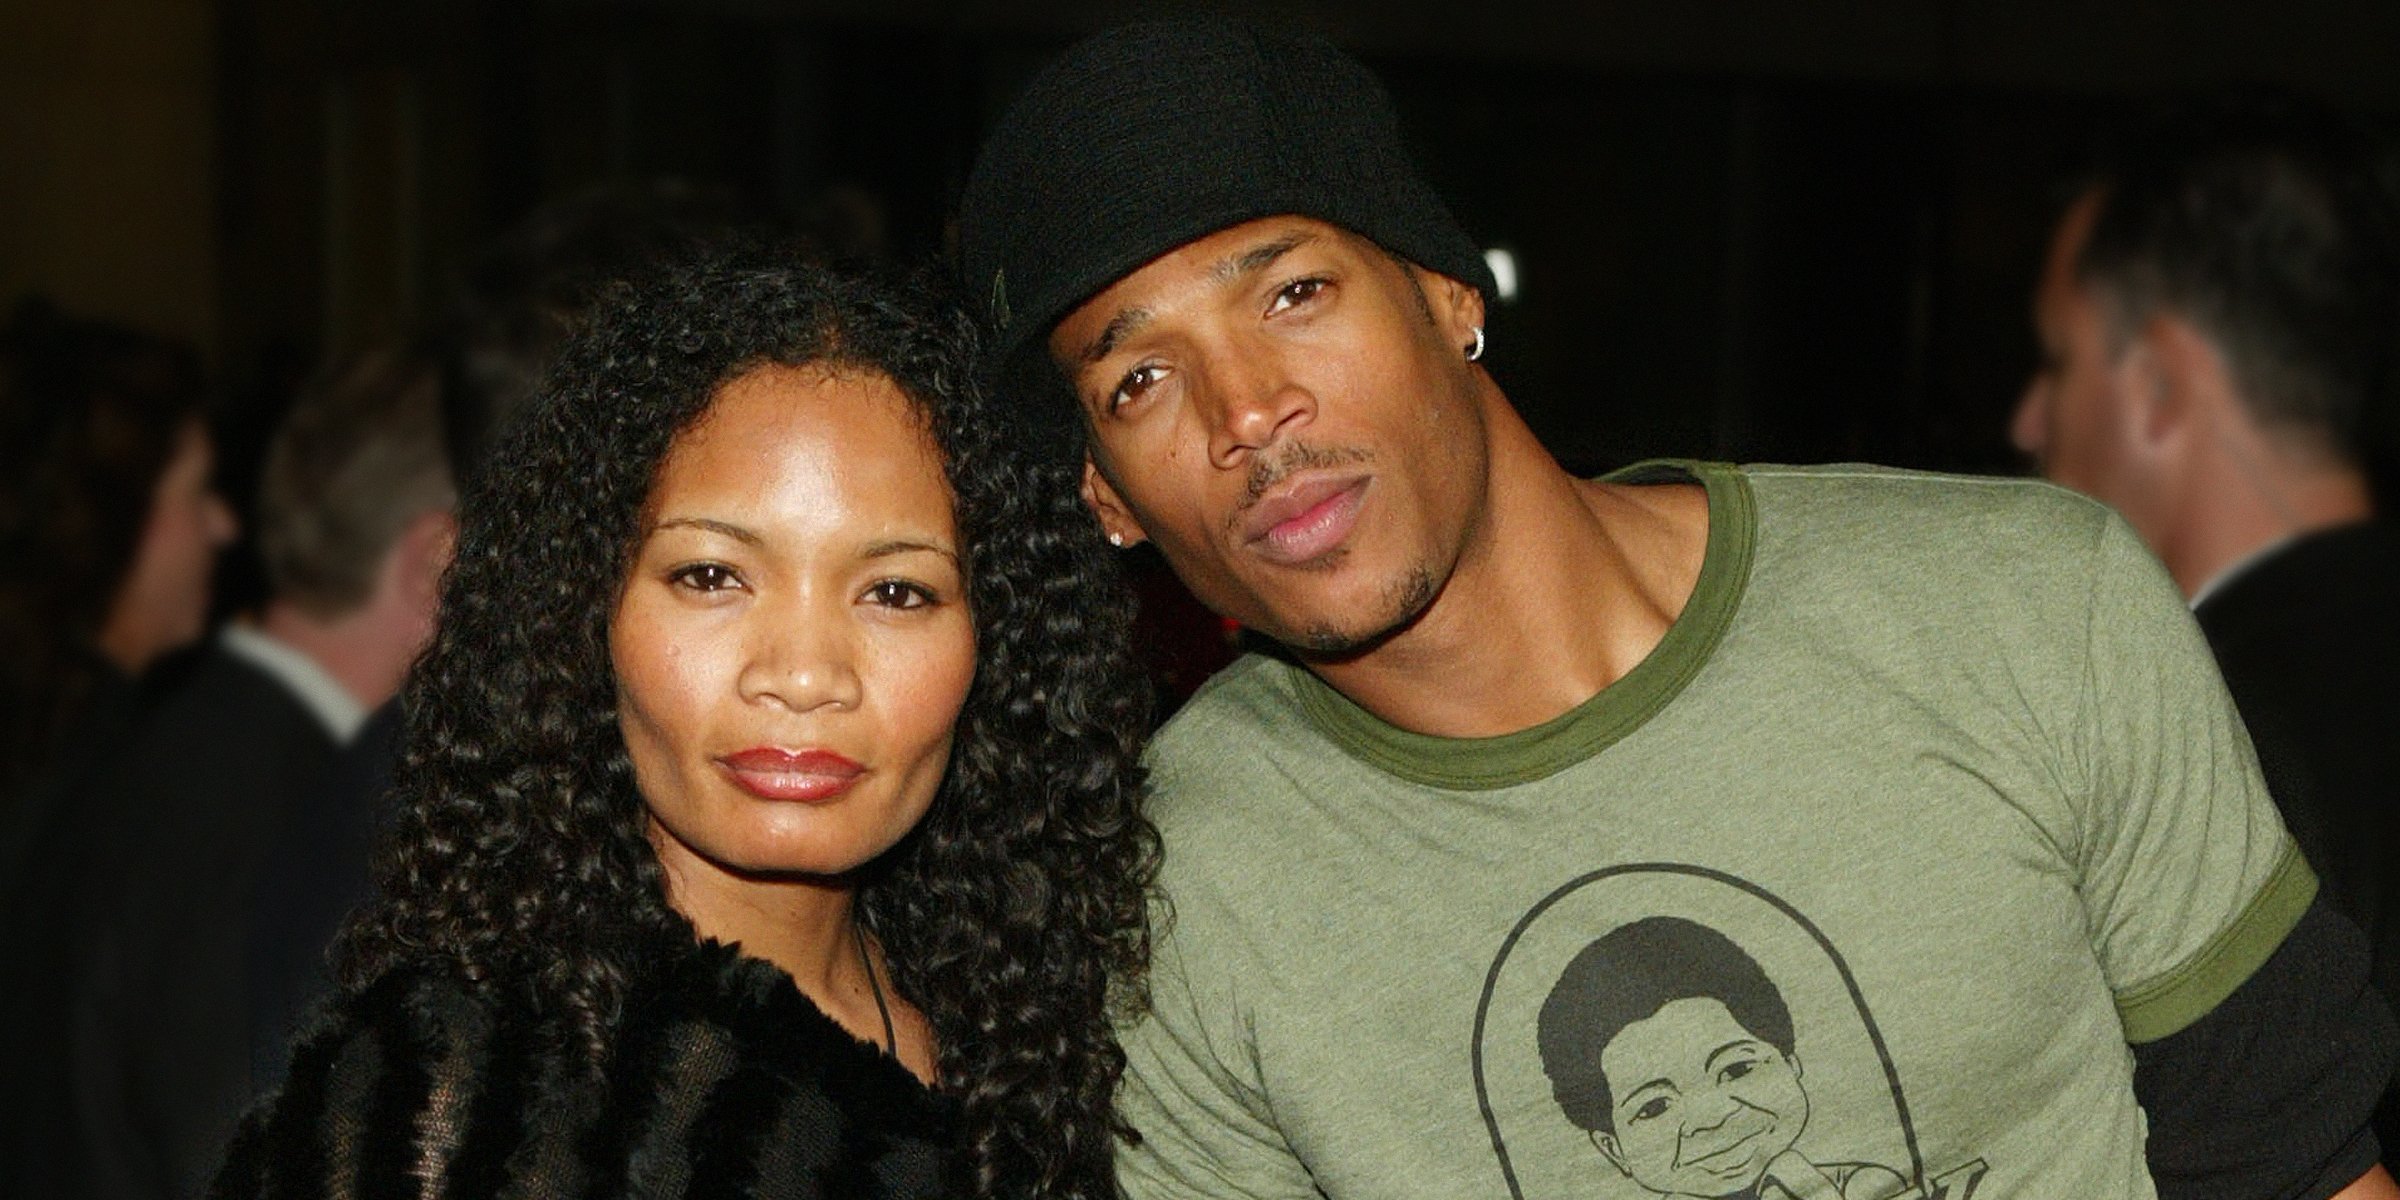 Angelica Zachary Is an Amazing Soul Who Marlon Wayans Called His Wife